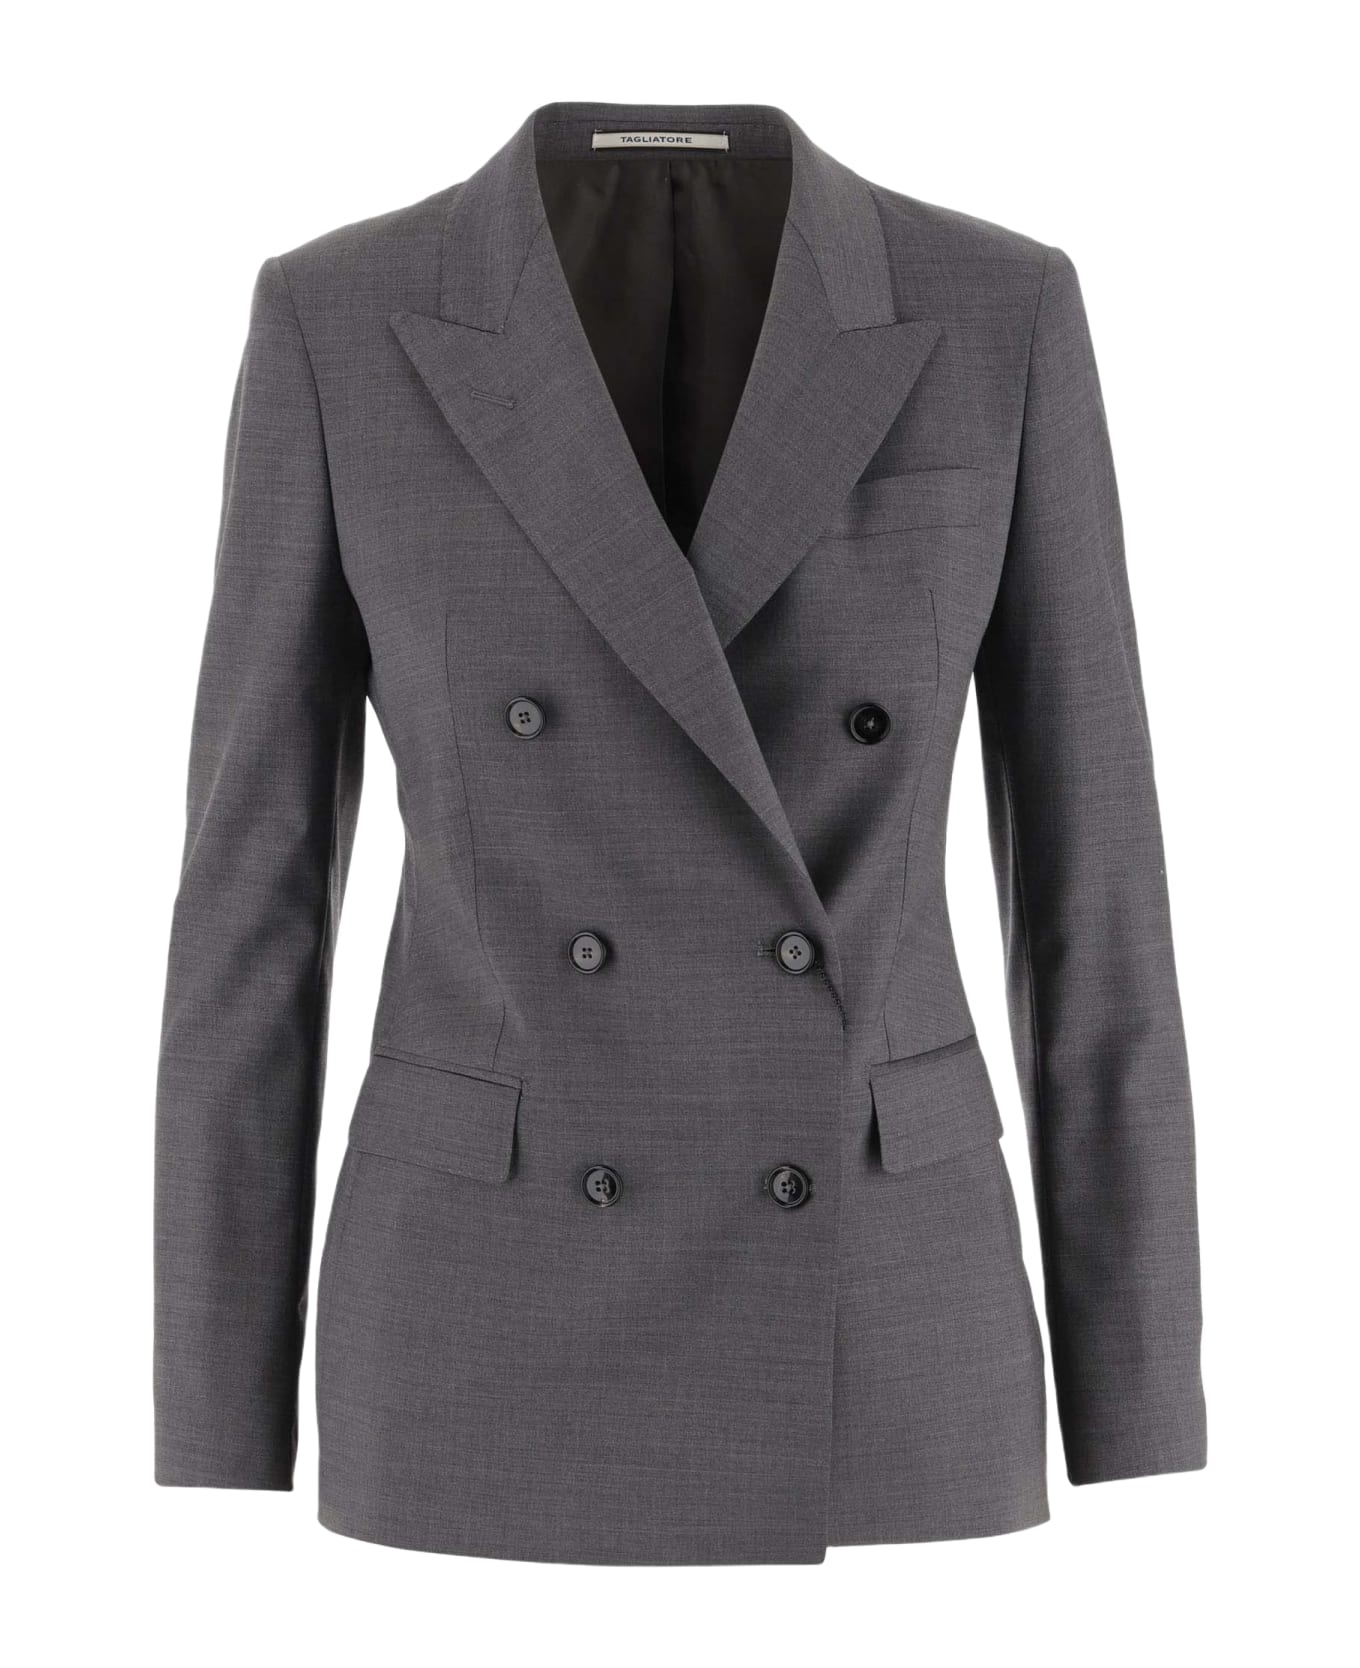 Tagliatore Double-breasted Stretch Wool Jacket - Grey